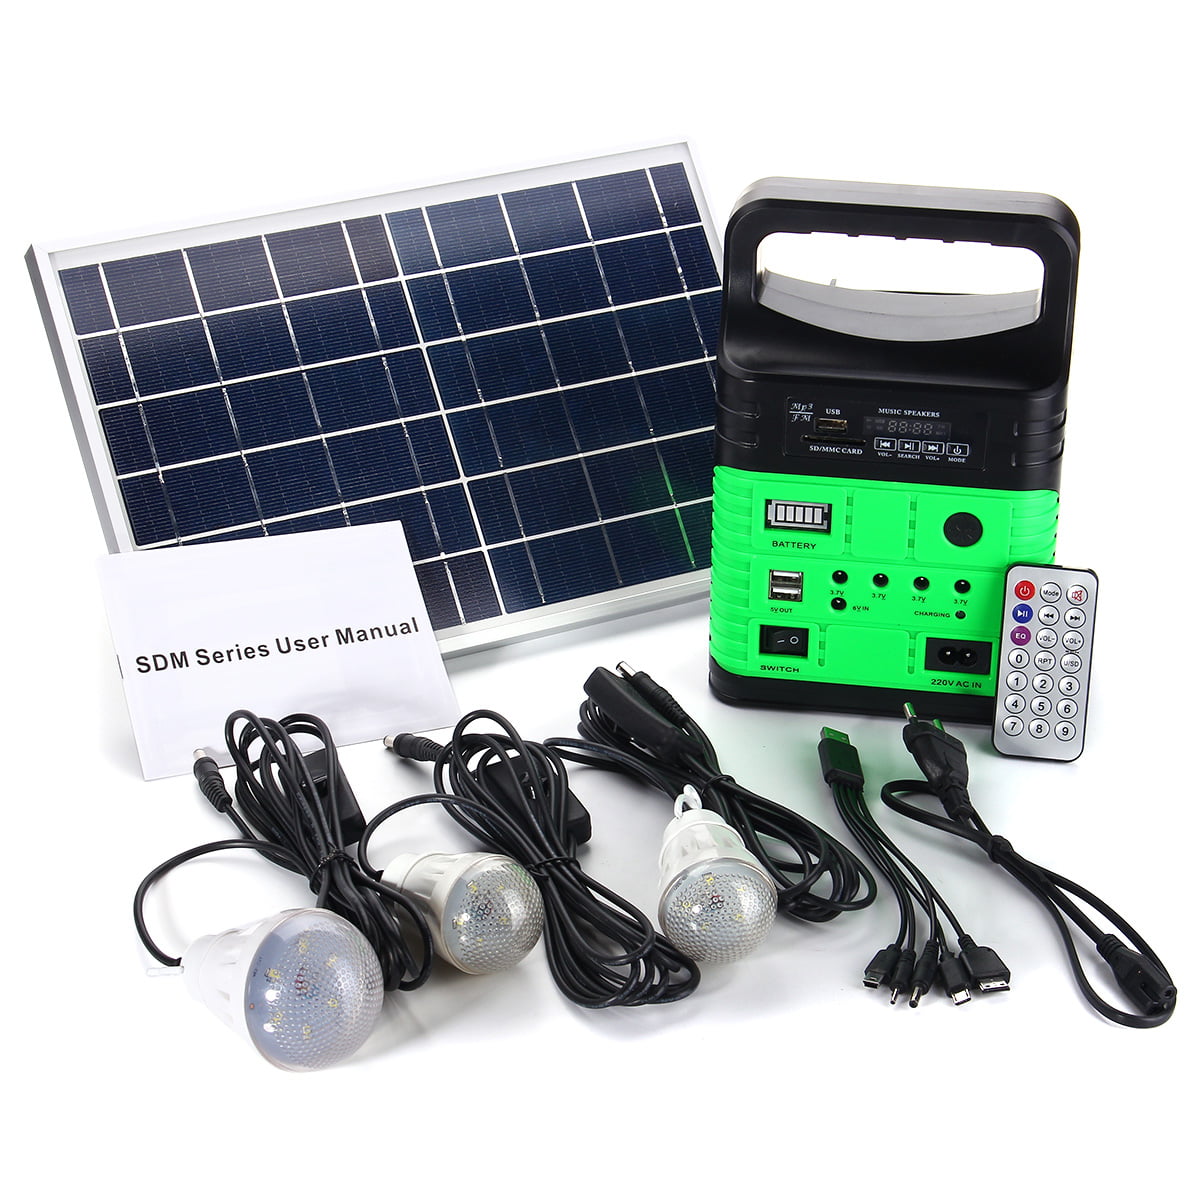 Details about   Solaaron All-In-1 Solar Generator & lighting system w/ bluetooth speaker 